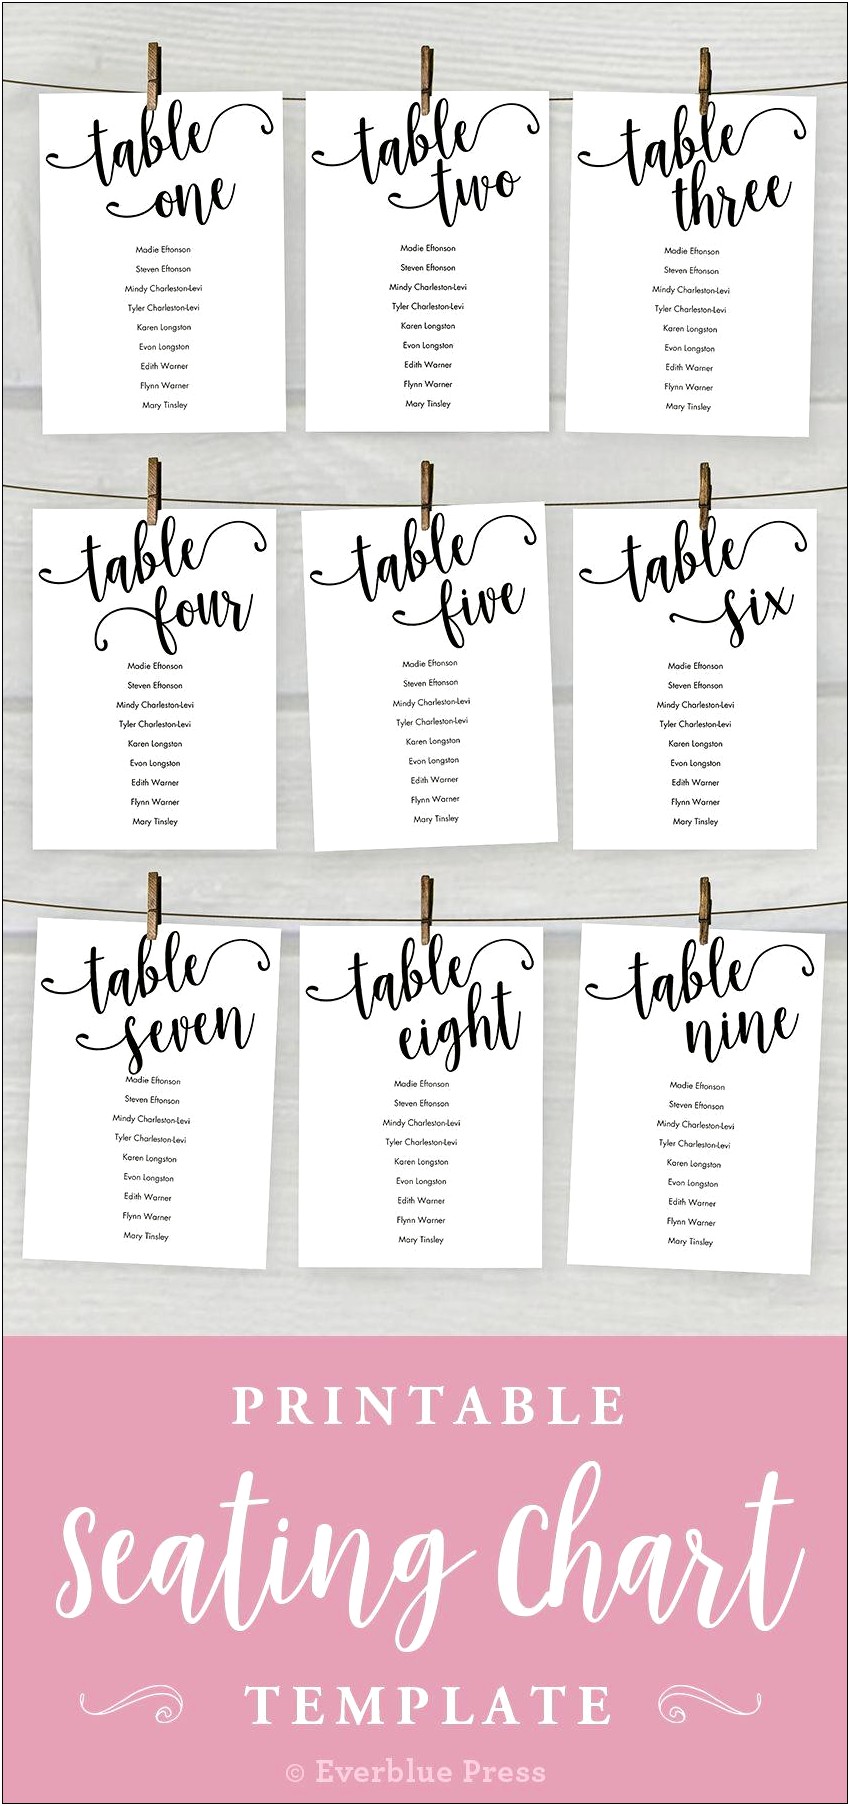 5 X 7 Word Template Seating Chart